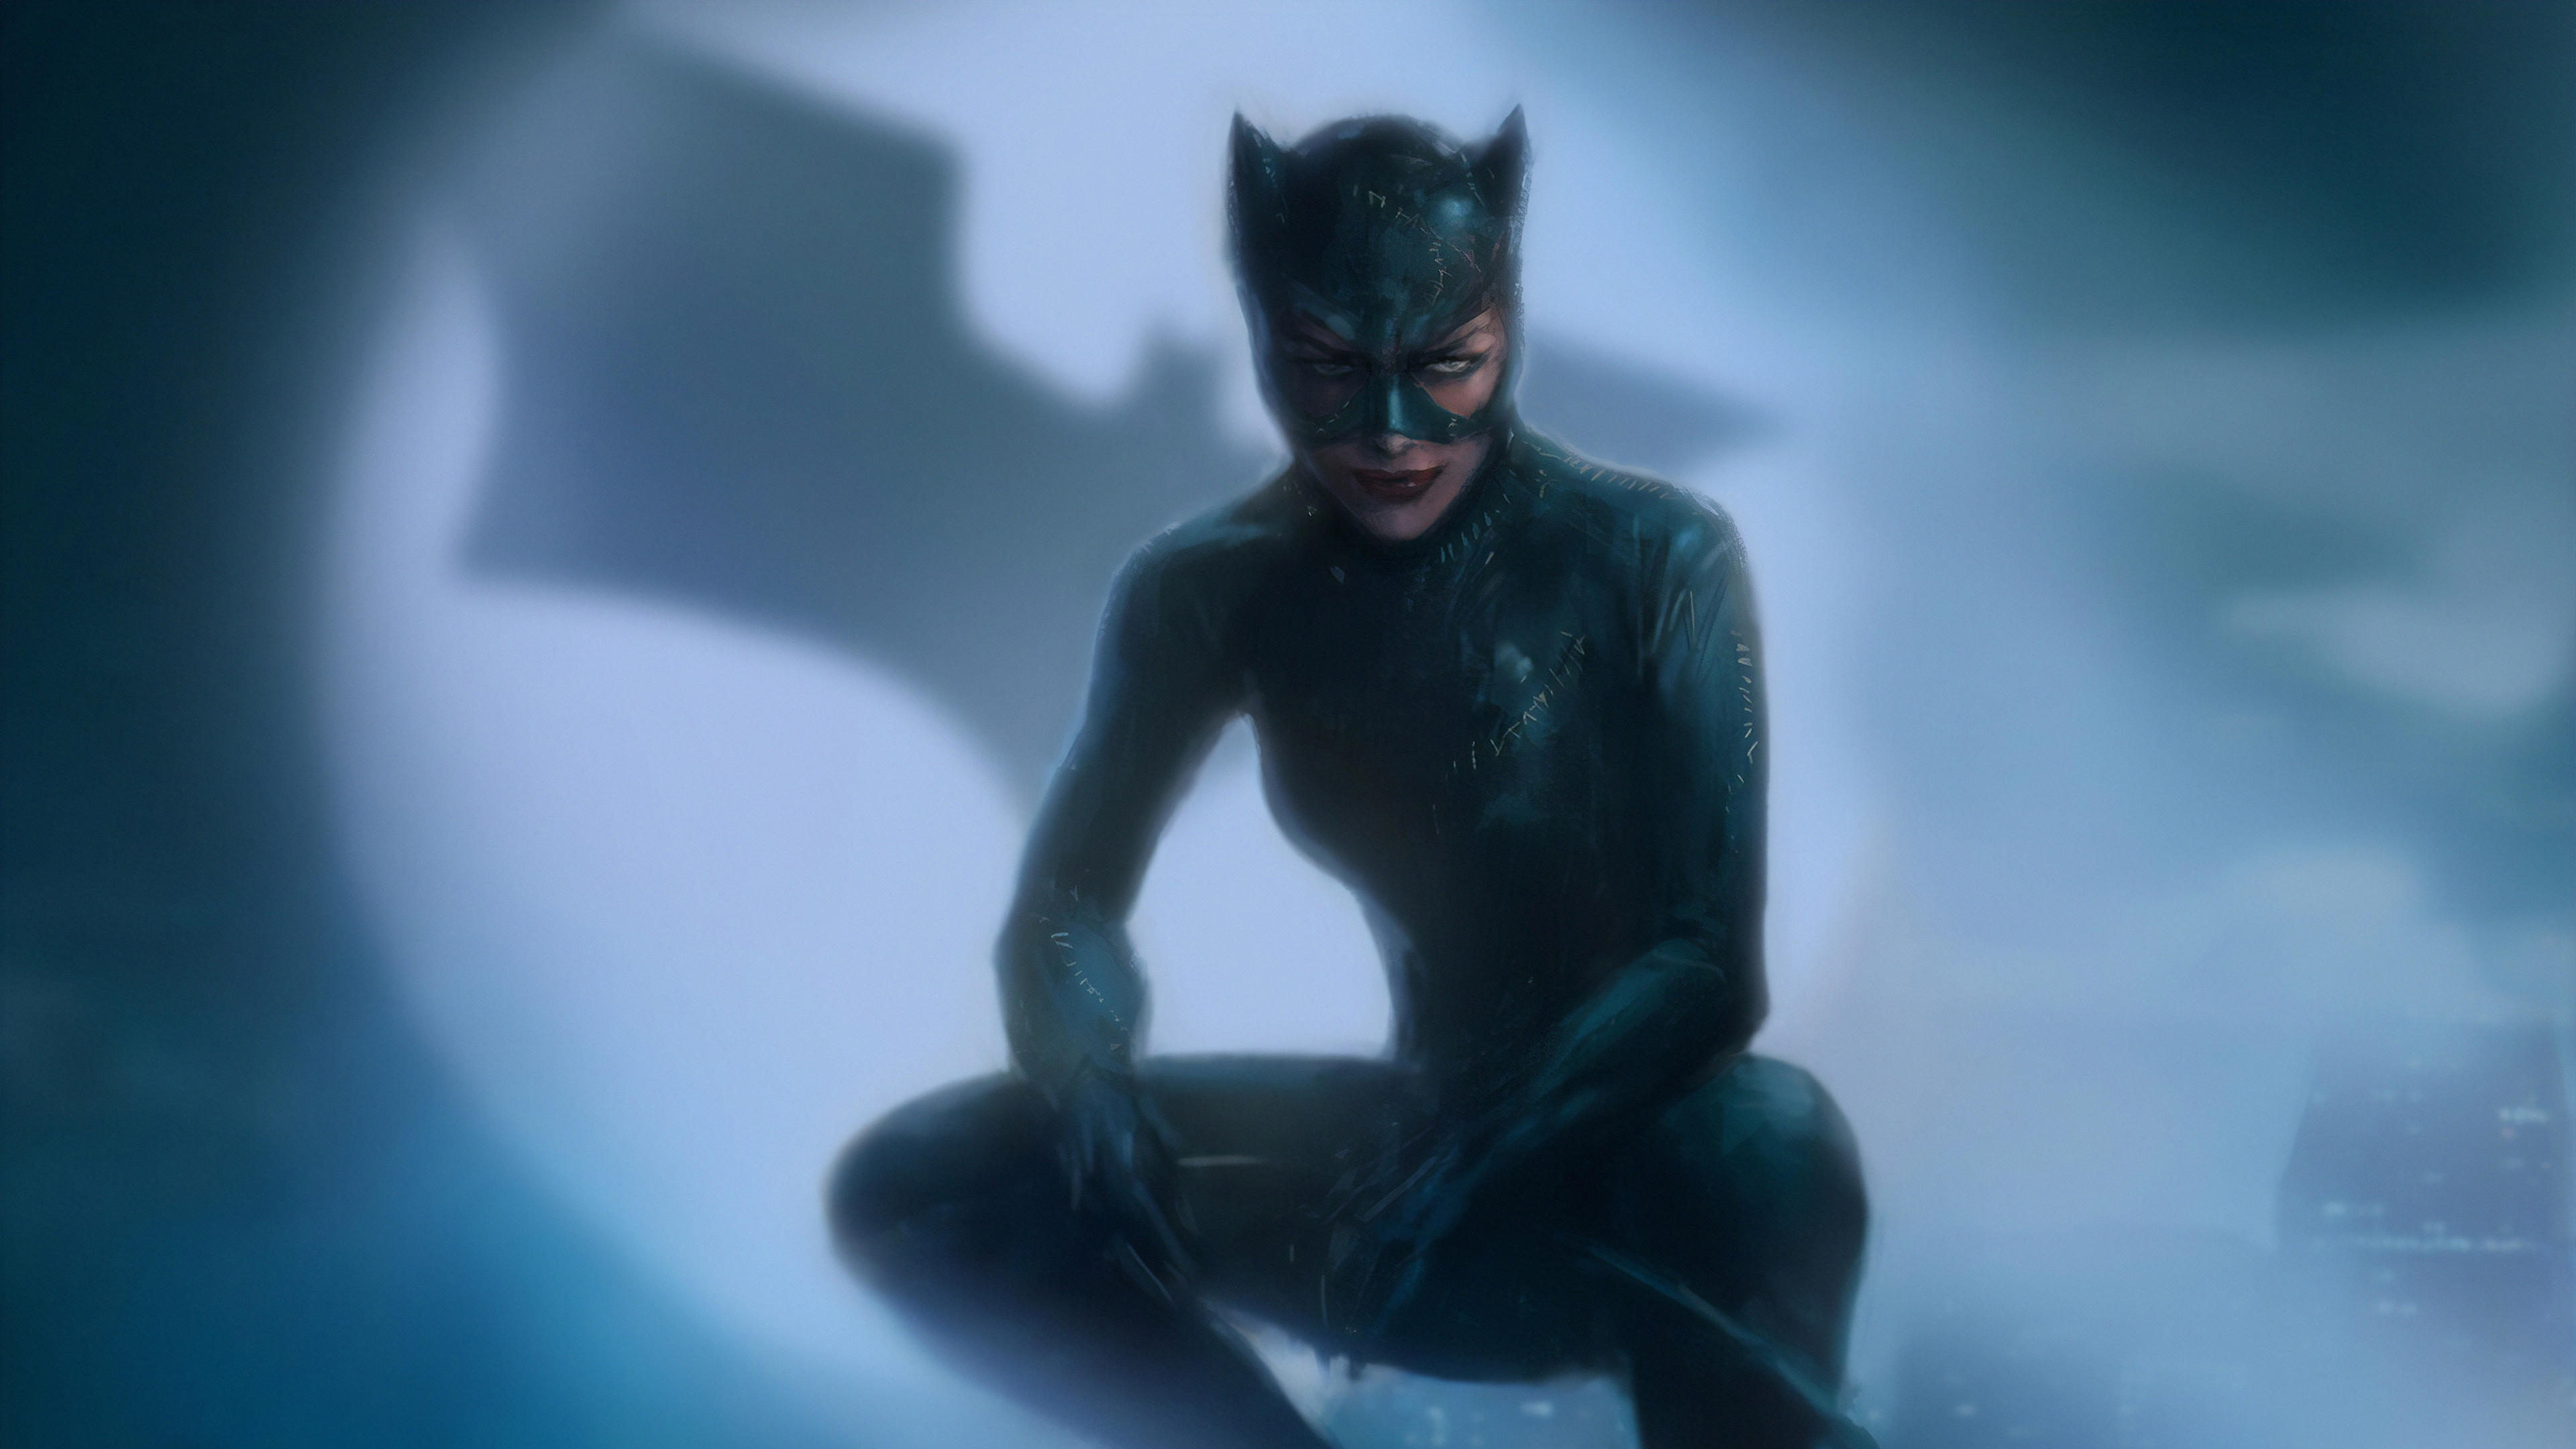 Catwoman: A woman, endowed with the speed, reflexes, and senses of a cat. 3840x2160 4K Wallpaper.